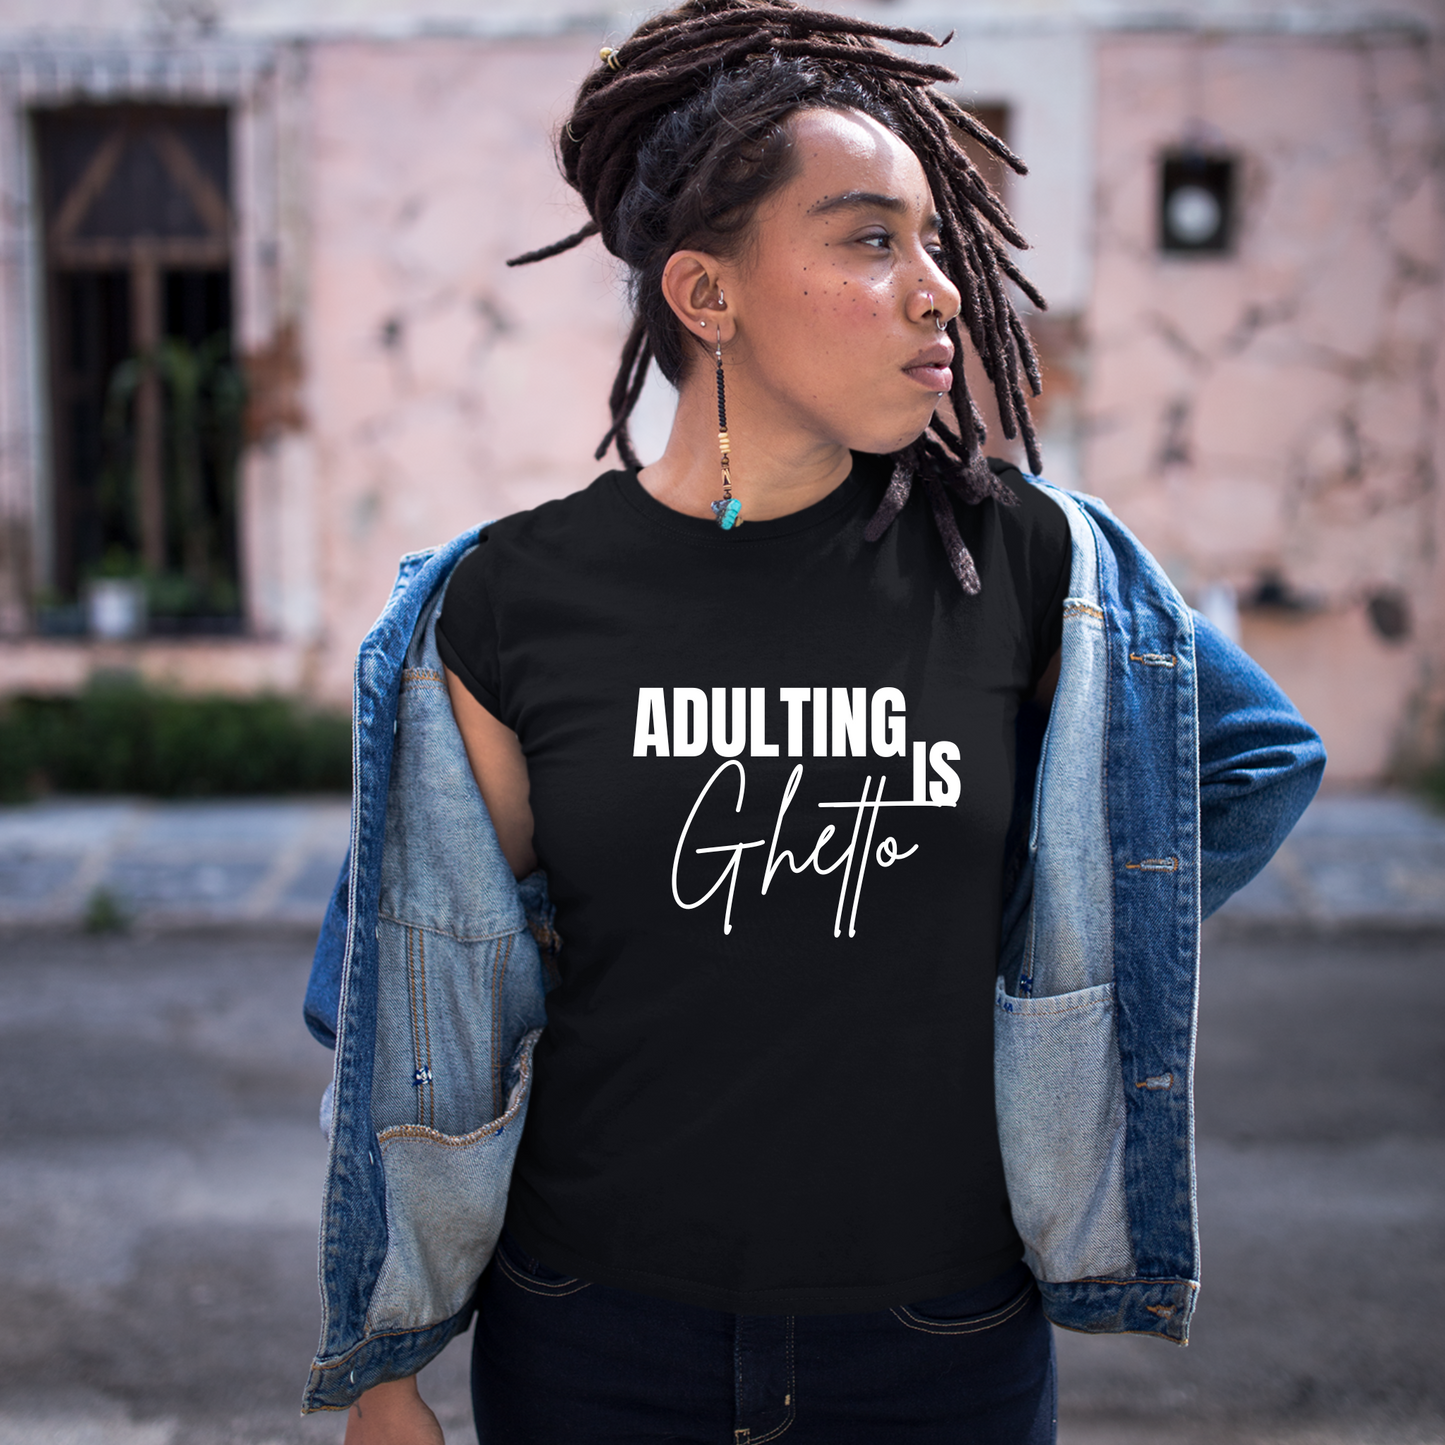 Adulting is Ghetto